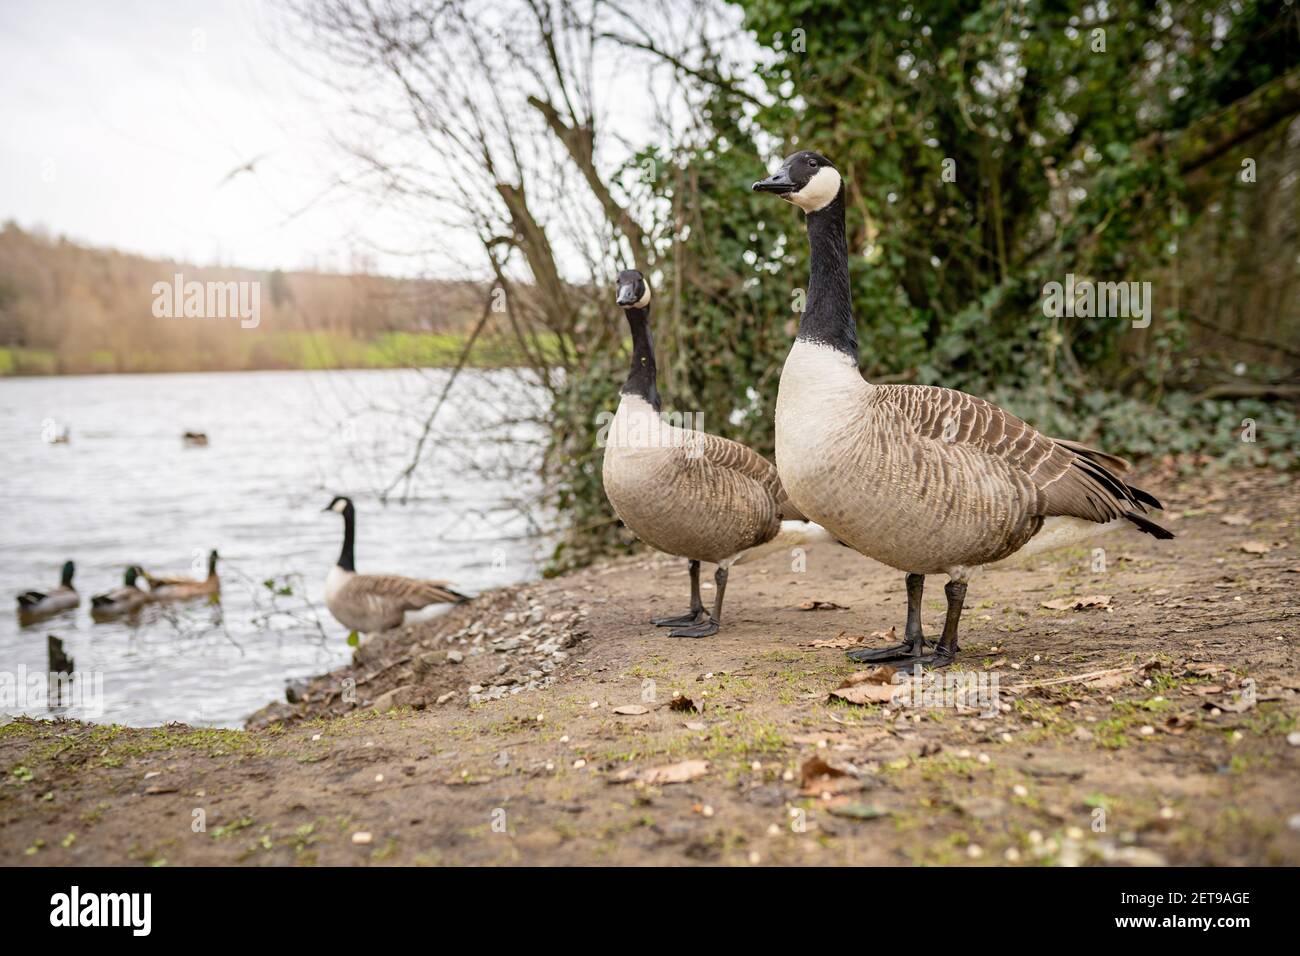 Two canadian geese standing next to a lake. Fendrod Lake, Swansea, West Glamorgan, South Wales, UK Stock Photo